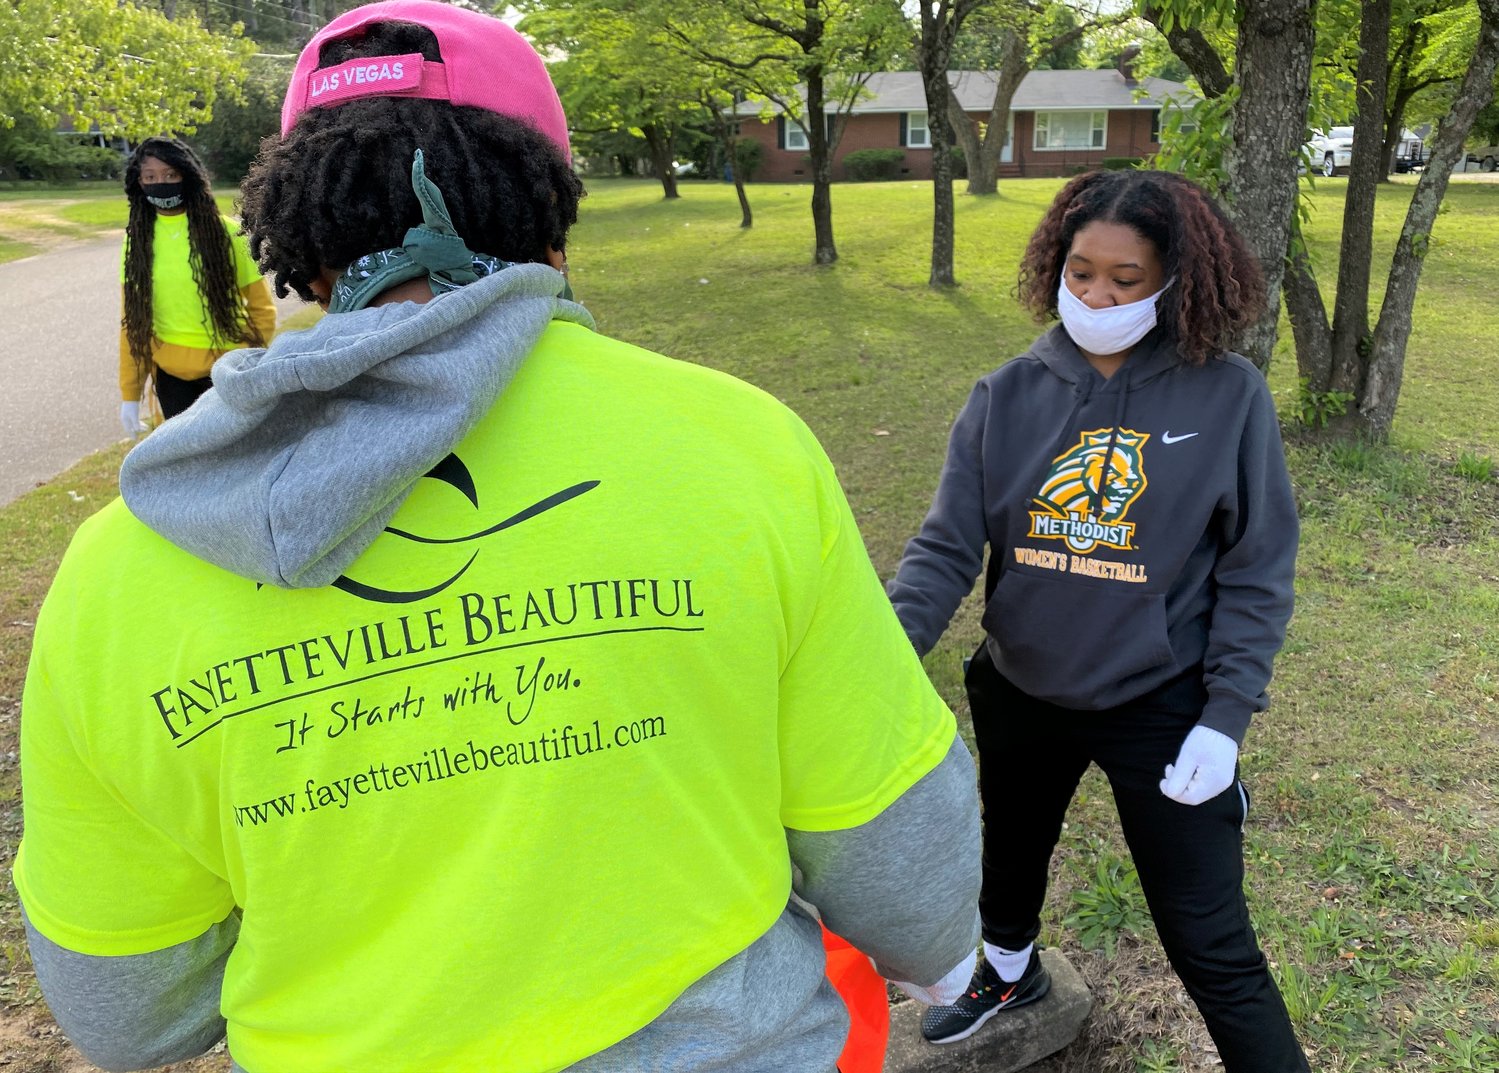 Fayetteville Beautiful volunteers to collect litter during Saturday cleanup